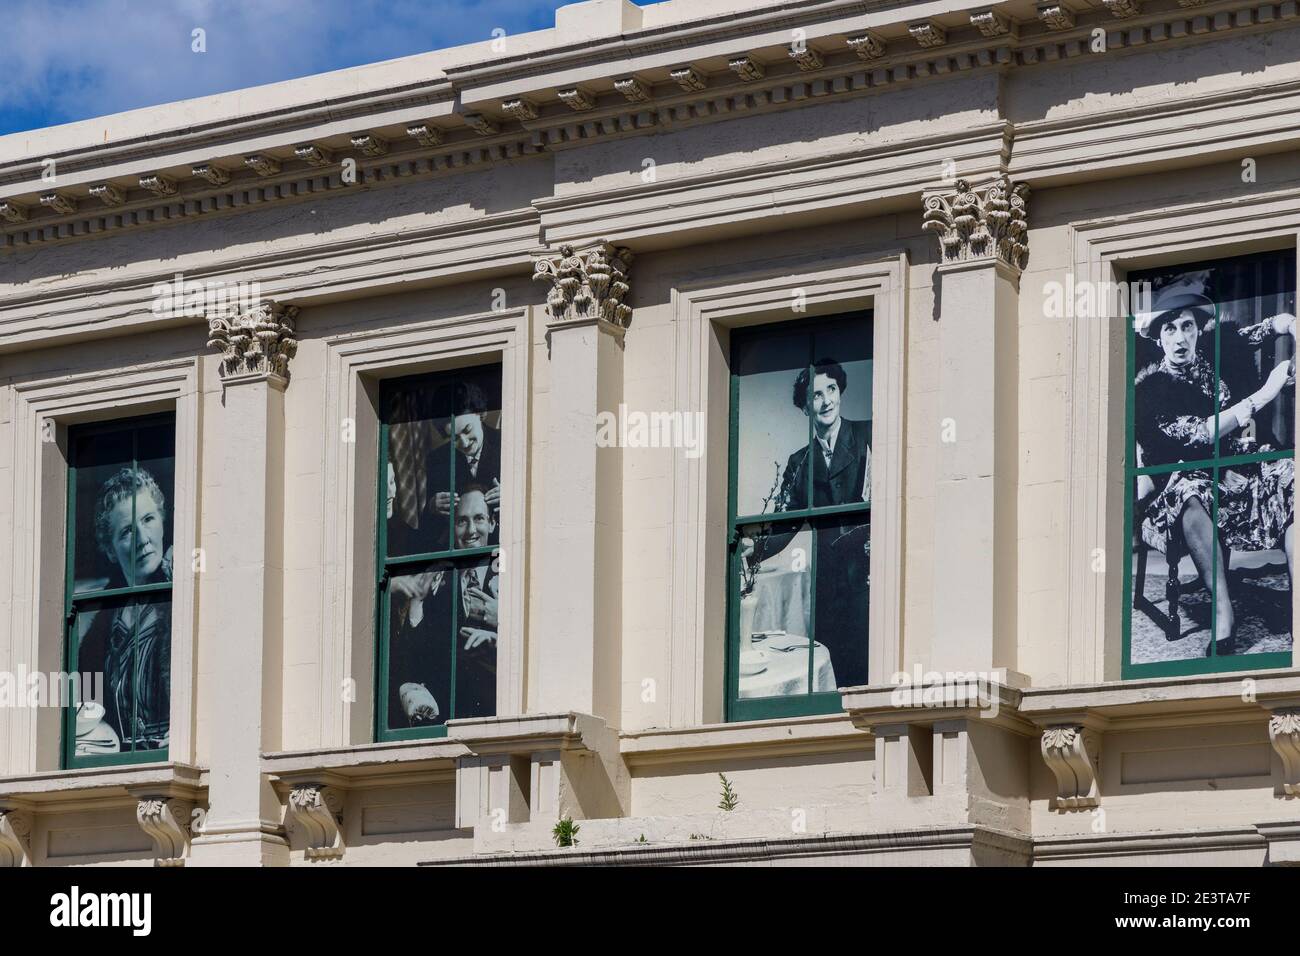 The circa 1870 Oamaru Repertory Society building, recently renovated, Oamaru, South Island, New Zealand. Historic theatrical figures in upper windows. Stock Photo